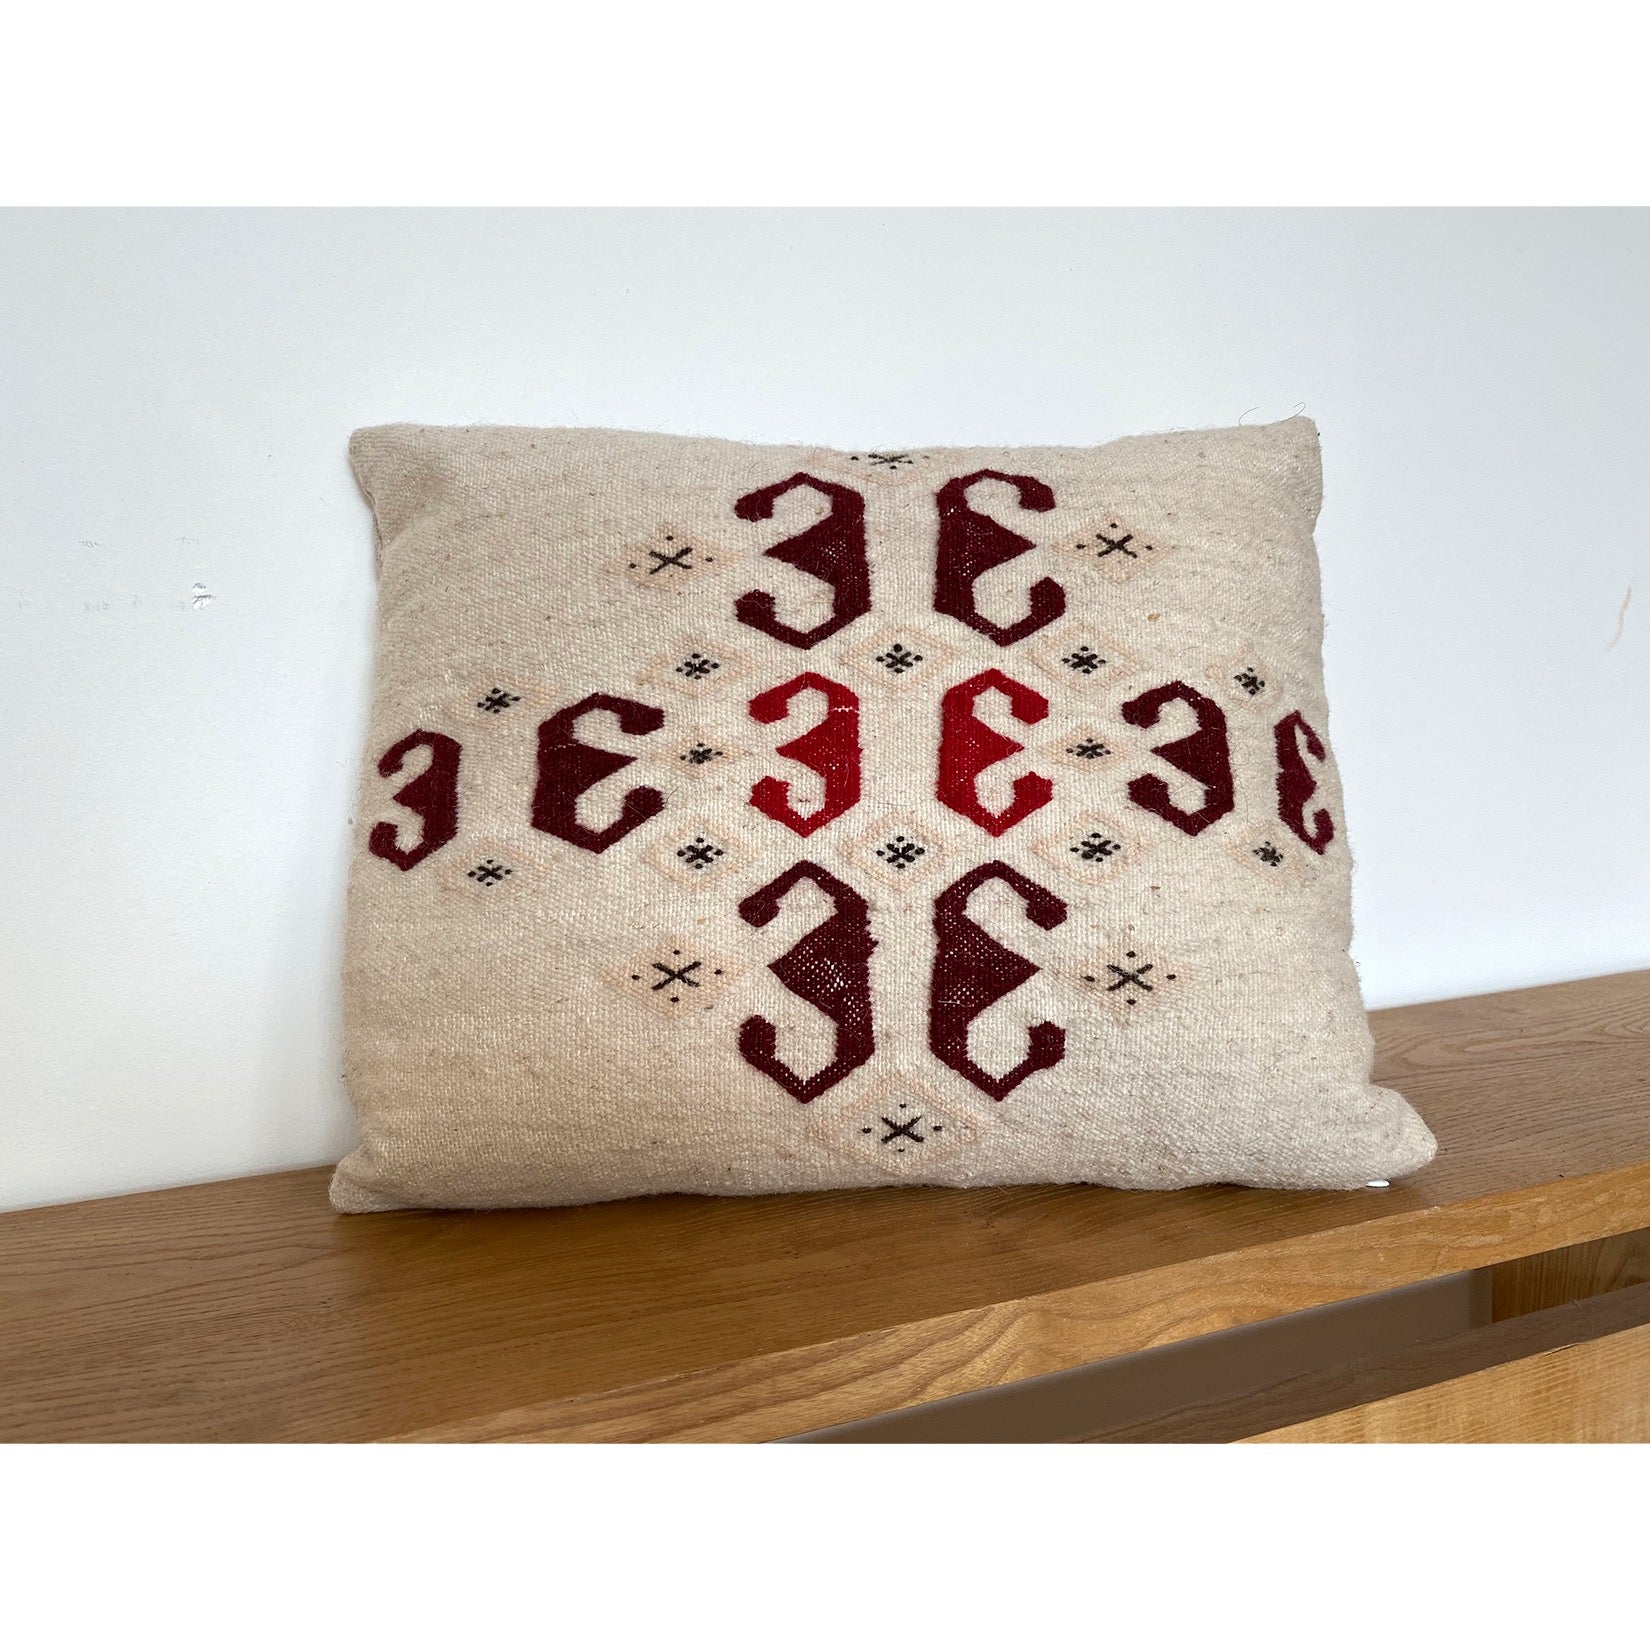 Modern Moroccan pillow in reds